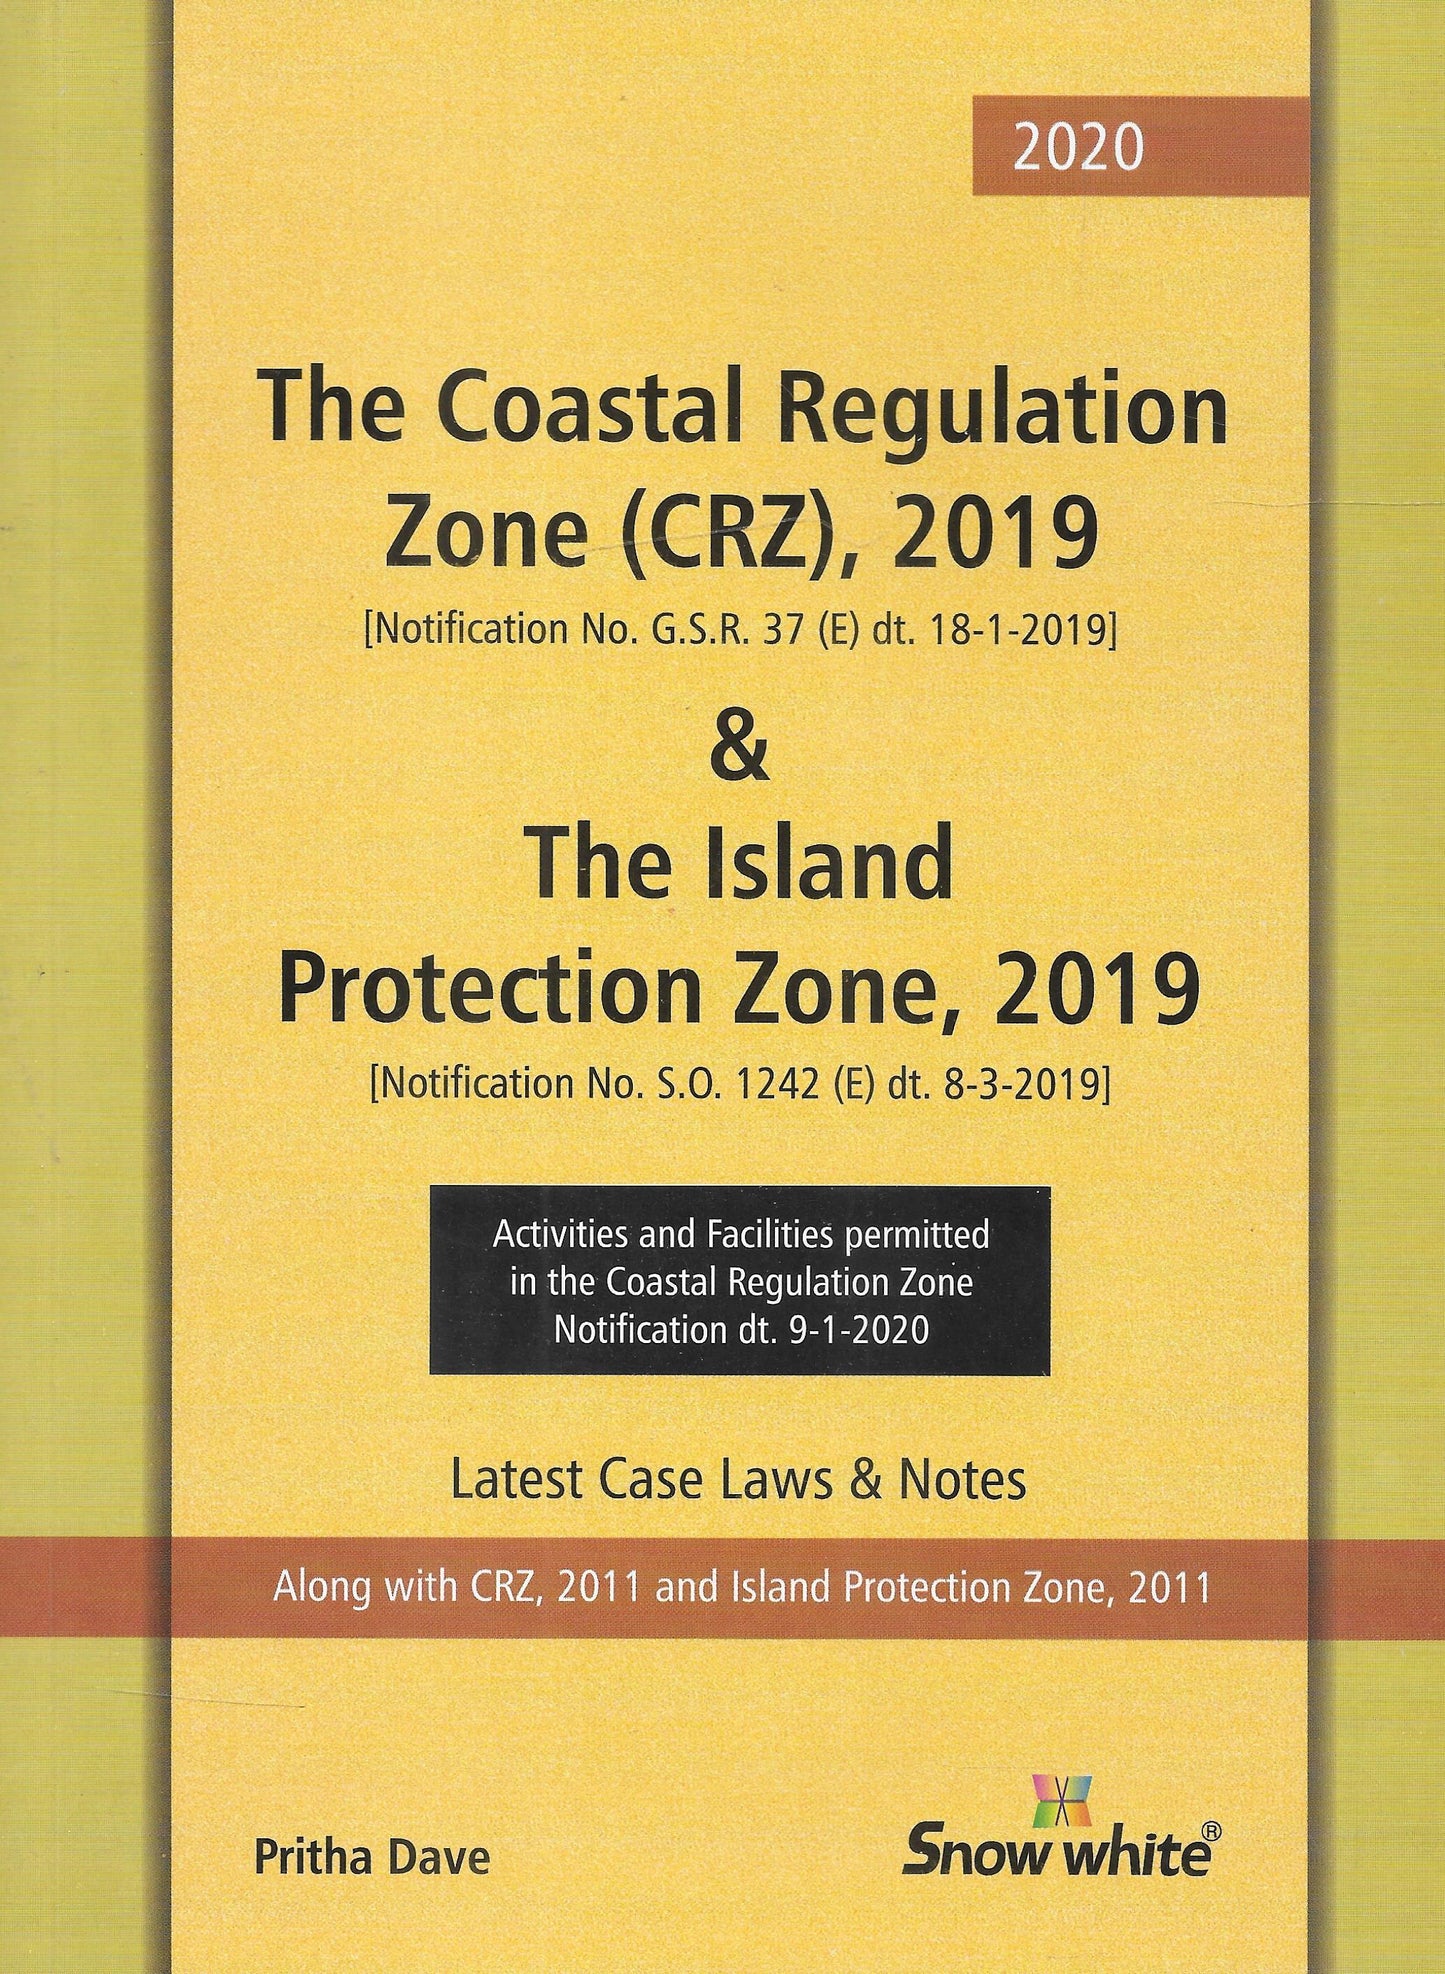 The Costal Regulation Zone (CRZ), 2019 & The Island Protection Zone 2019 - M&J Services